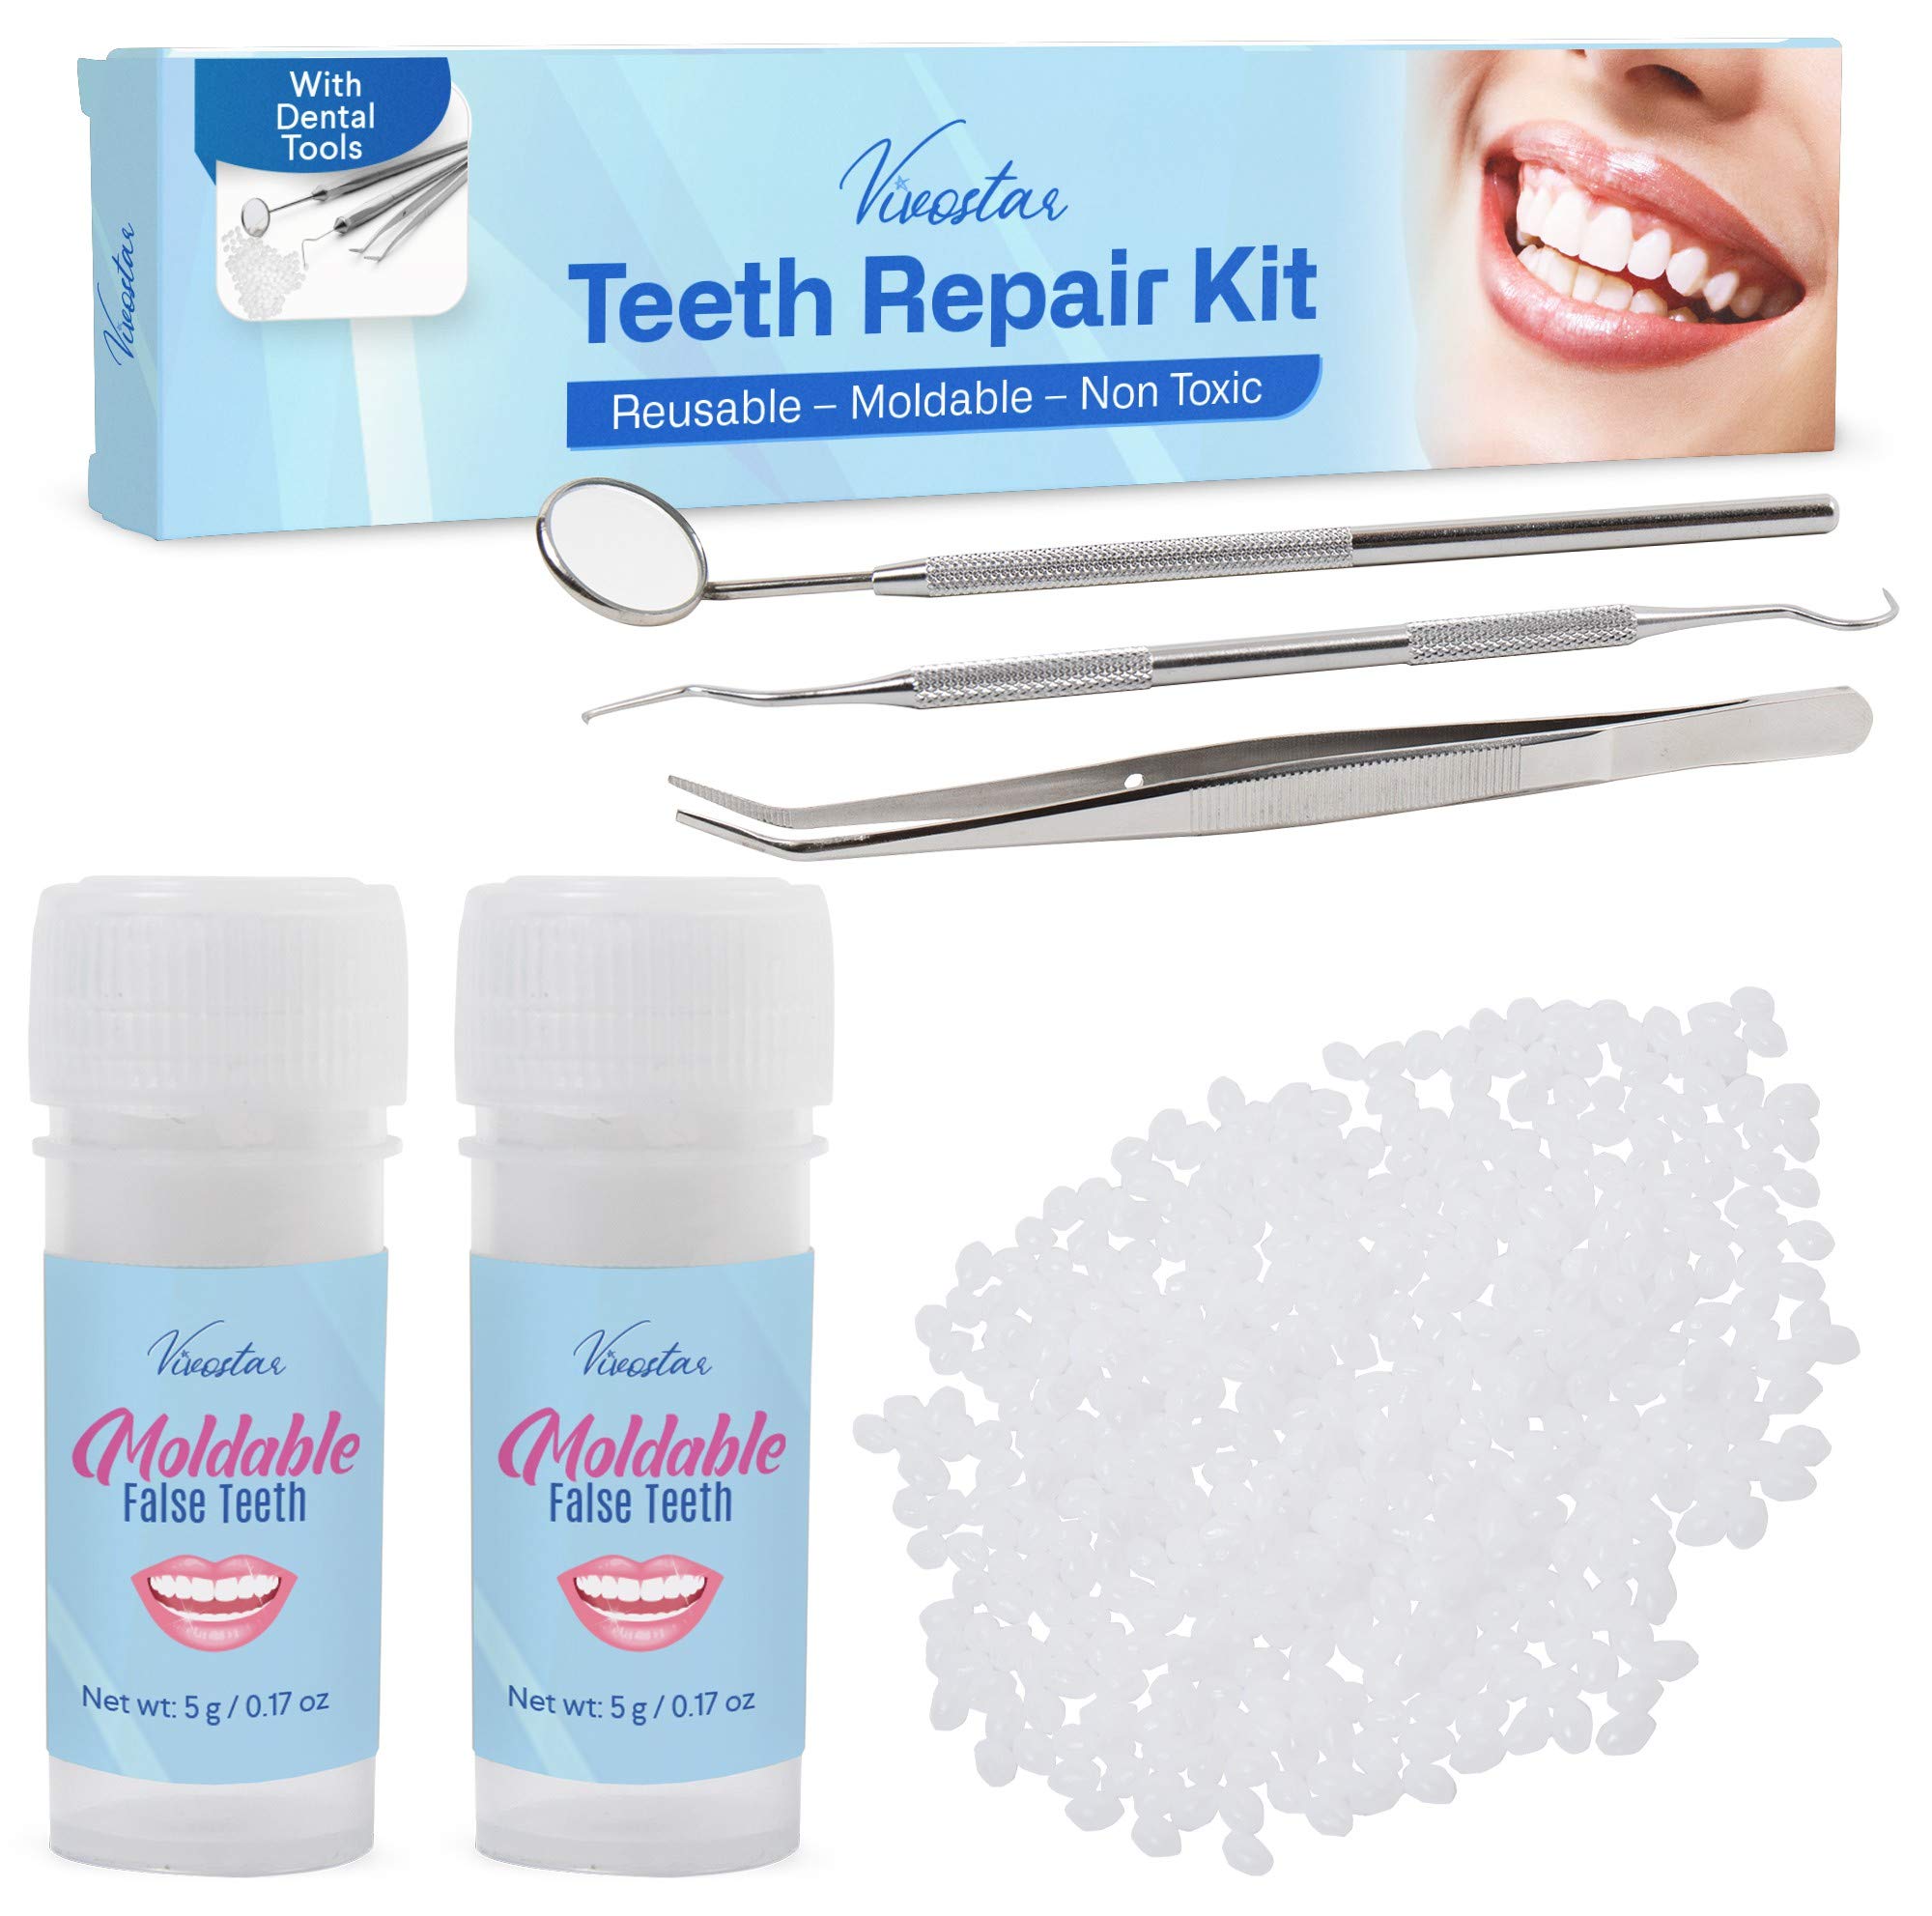 Teeth Repair Kit, Temporary Teeth replacement kit, Moldable False Teeth,  Thermal Fitting Beads for Snap On